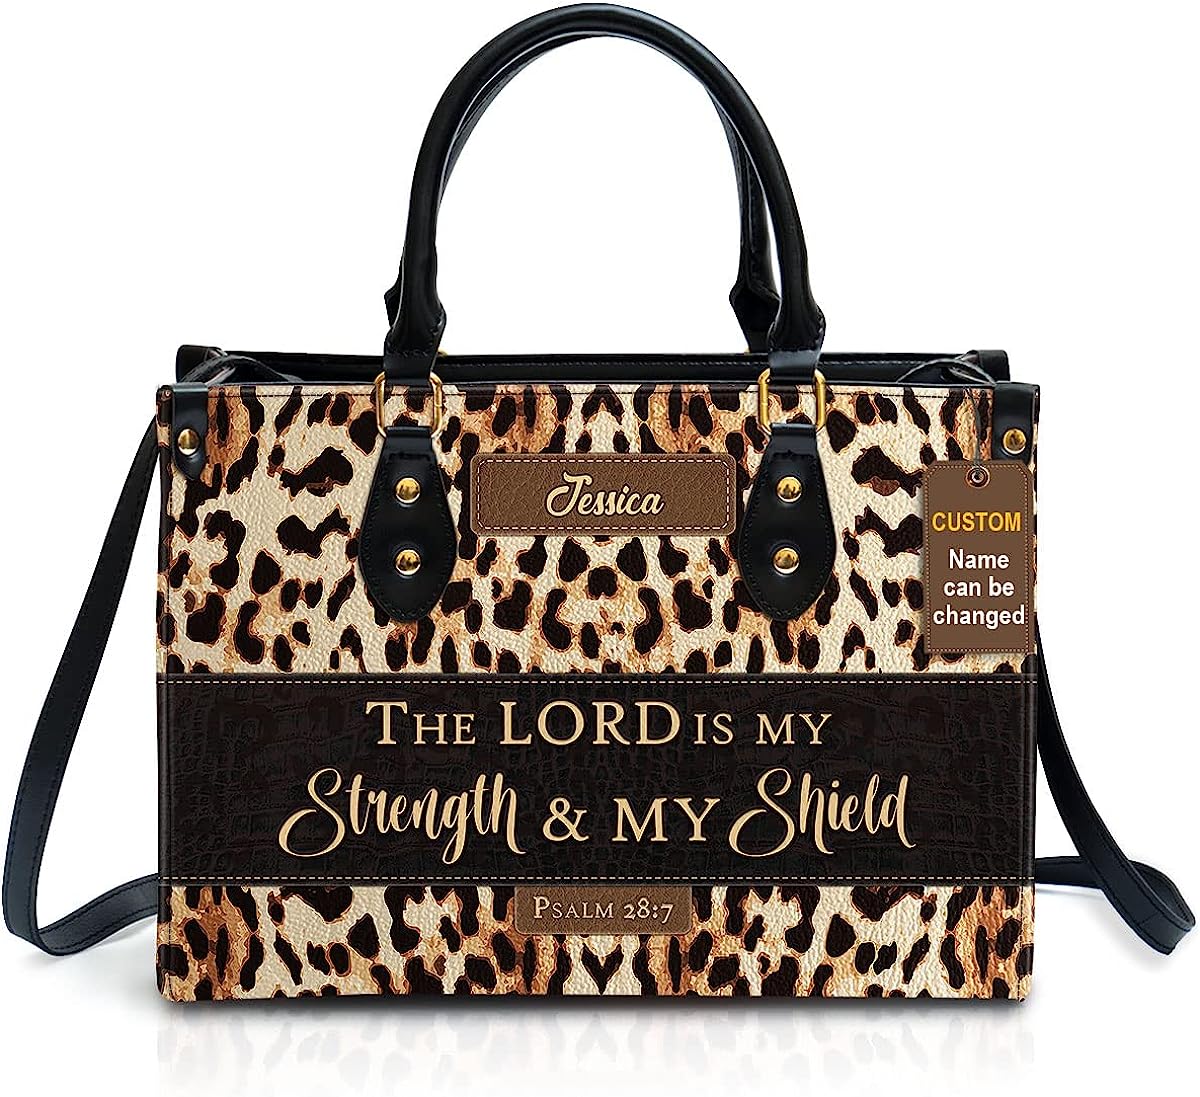 Christianartbag Handbags, The Lord Is My Strength & My Shield Psalm 28:7 Leather Bags, Personalized Bags, Gifts for Women, Christmas Gift, CABLTB01300723. - Christian Art Bag